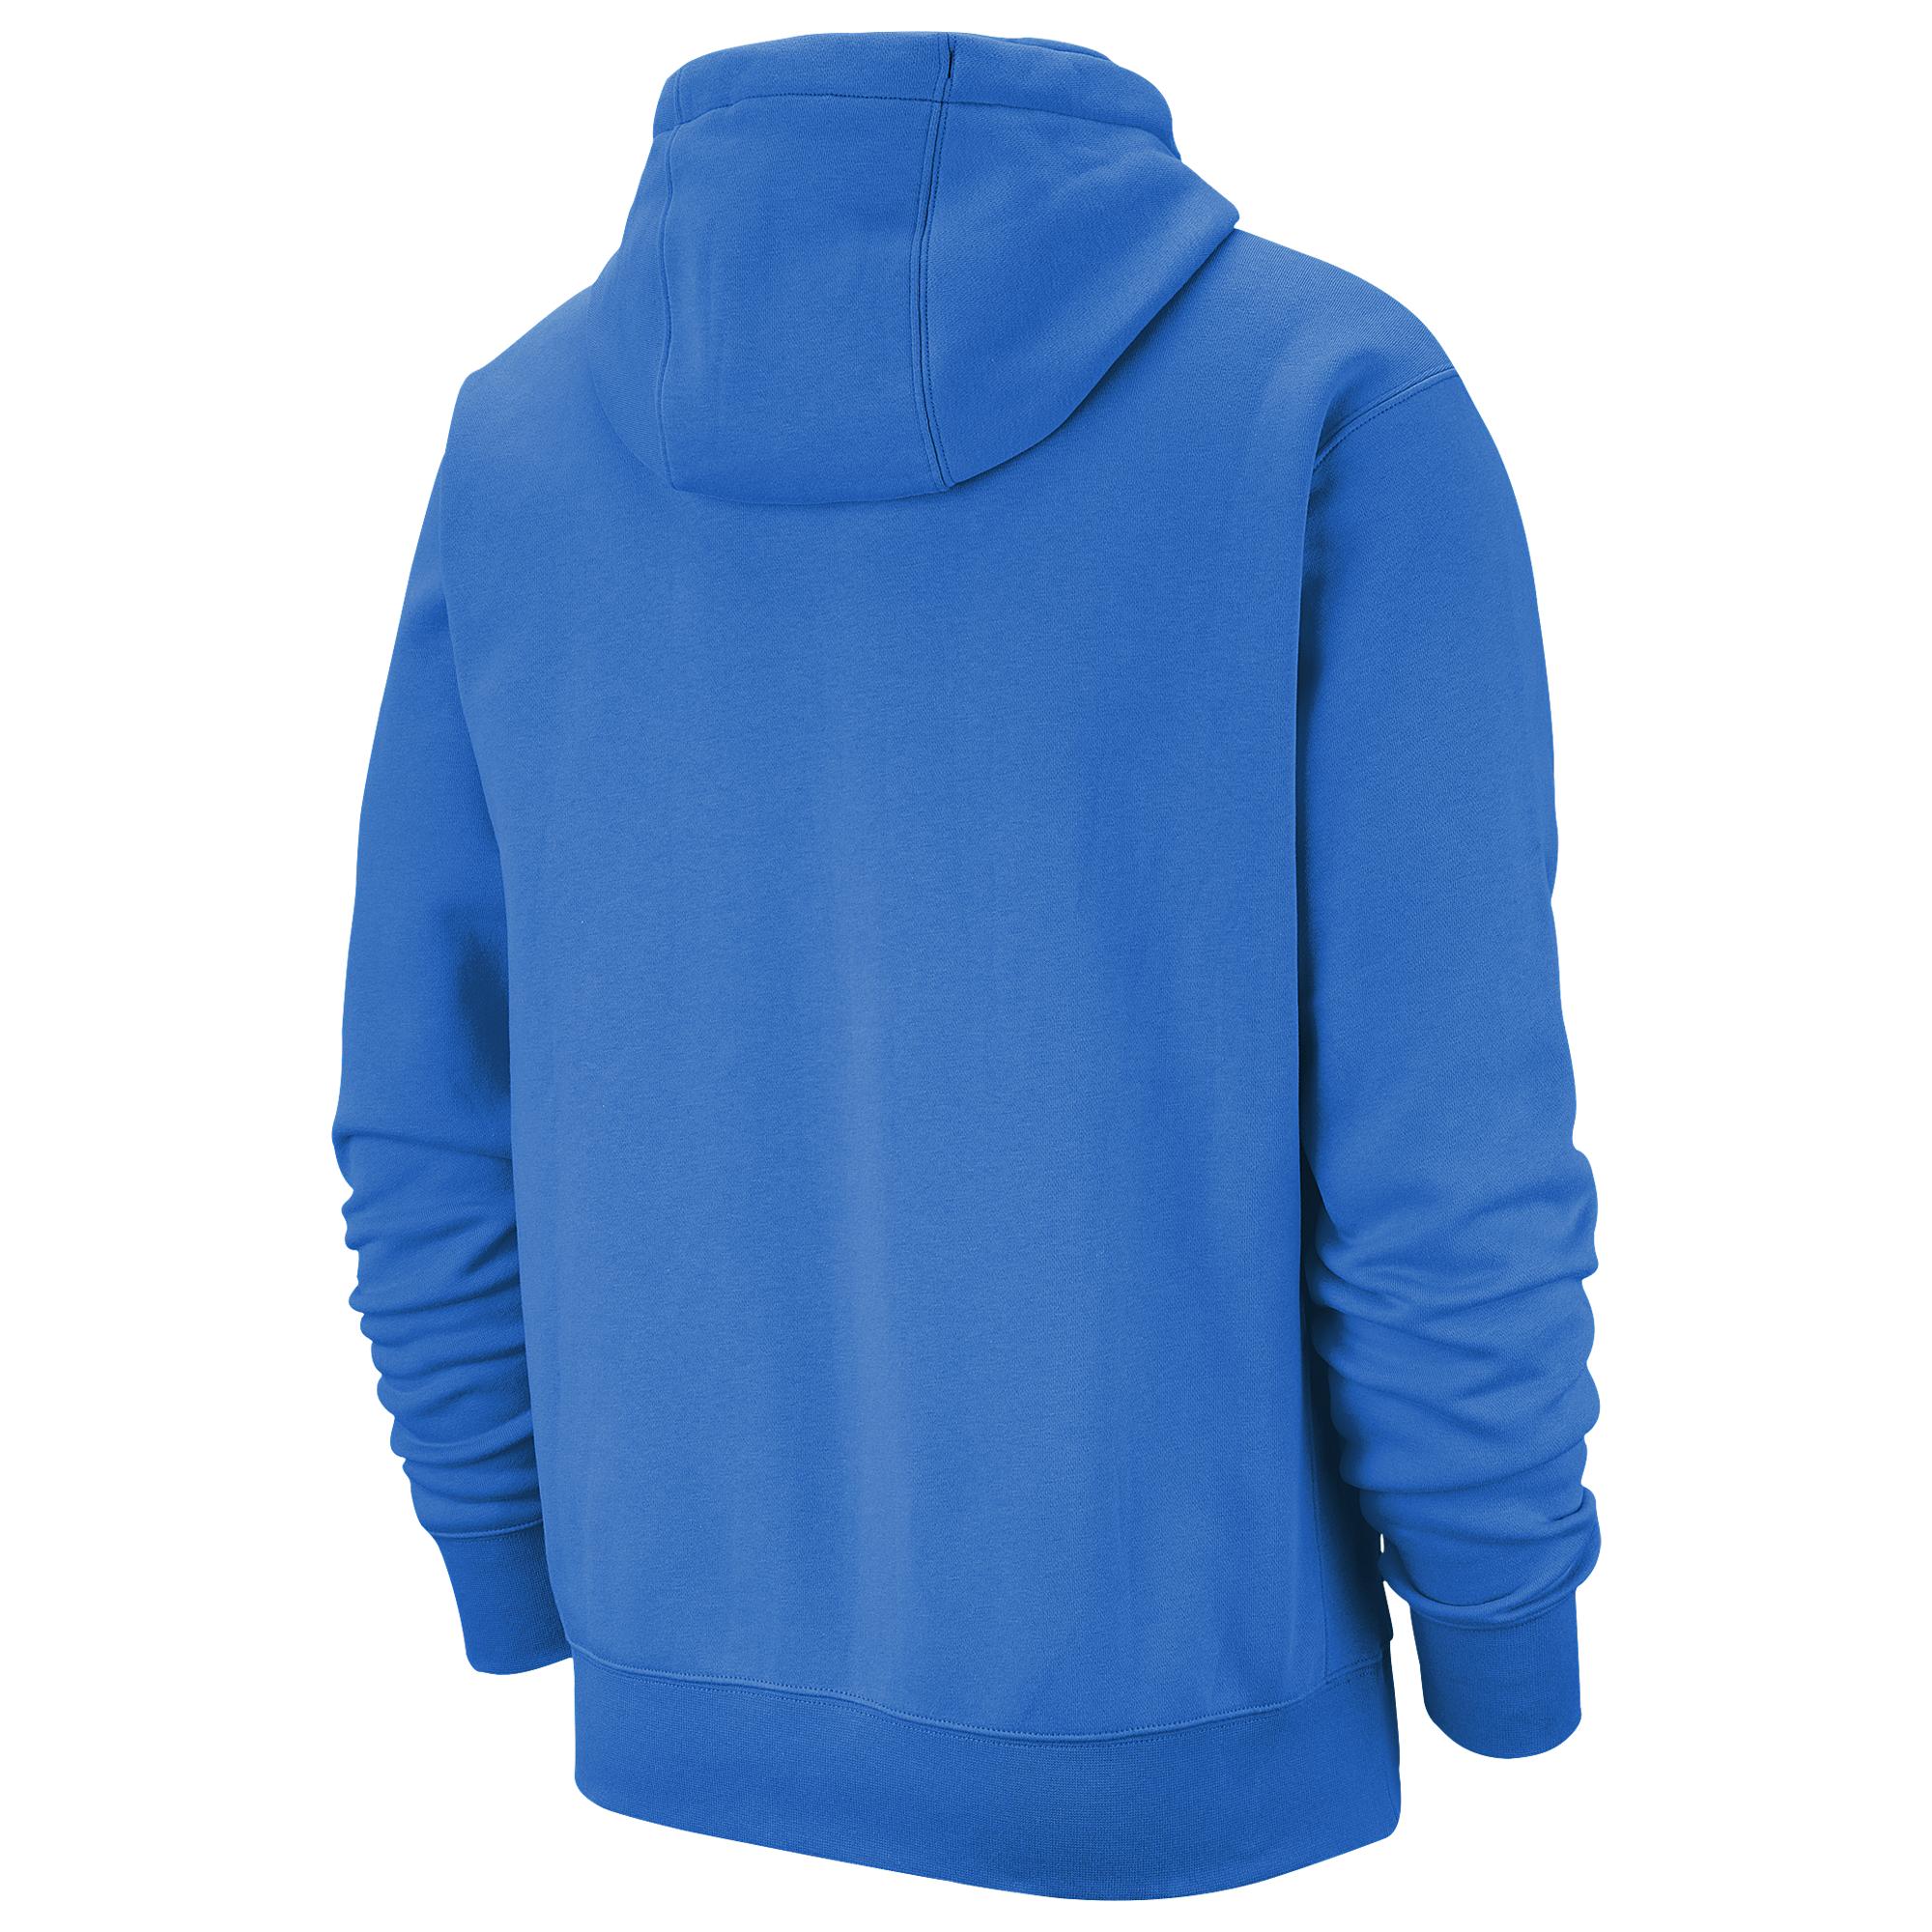 Nike Cotton Club Pullover Hoodie in Blue for Men - Lyst